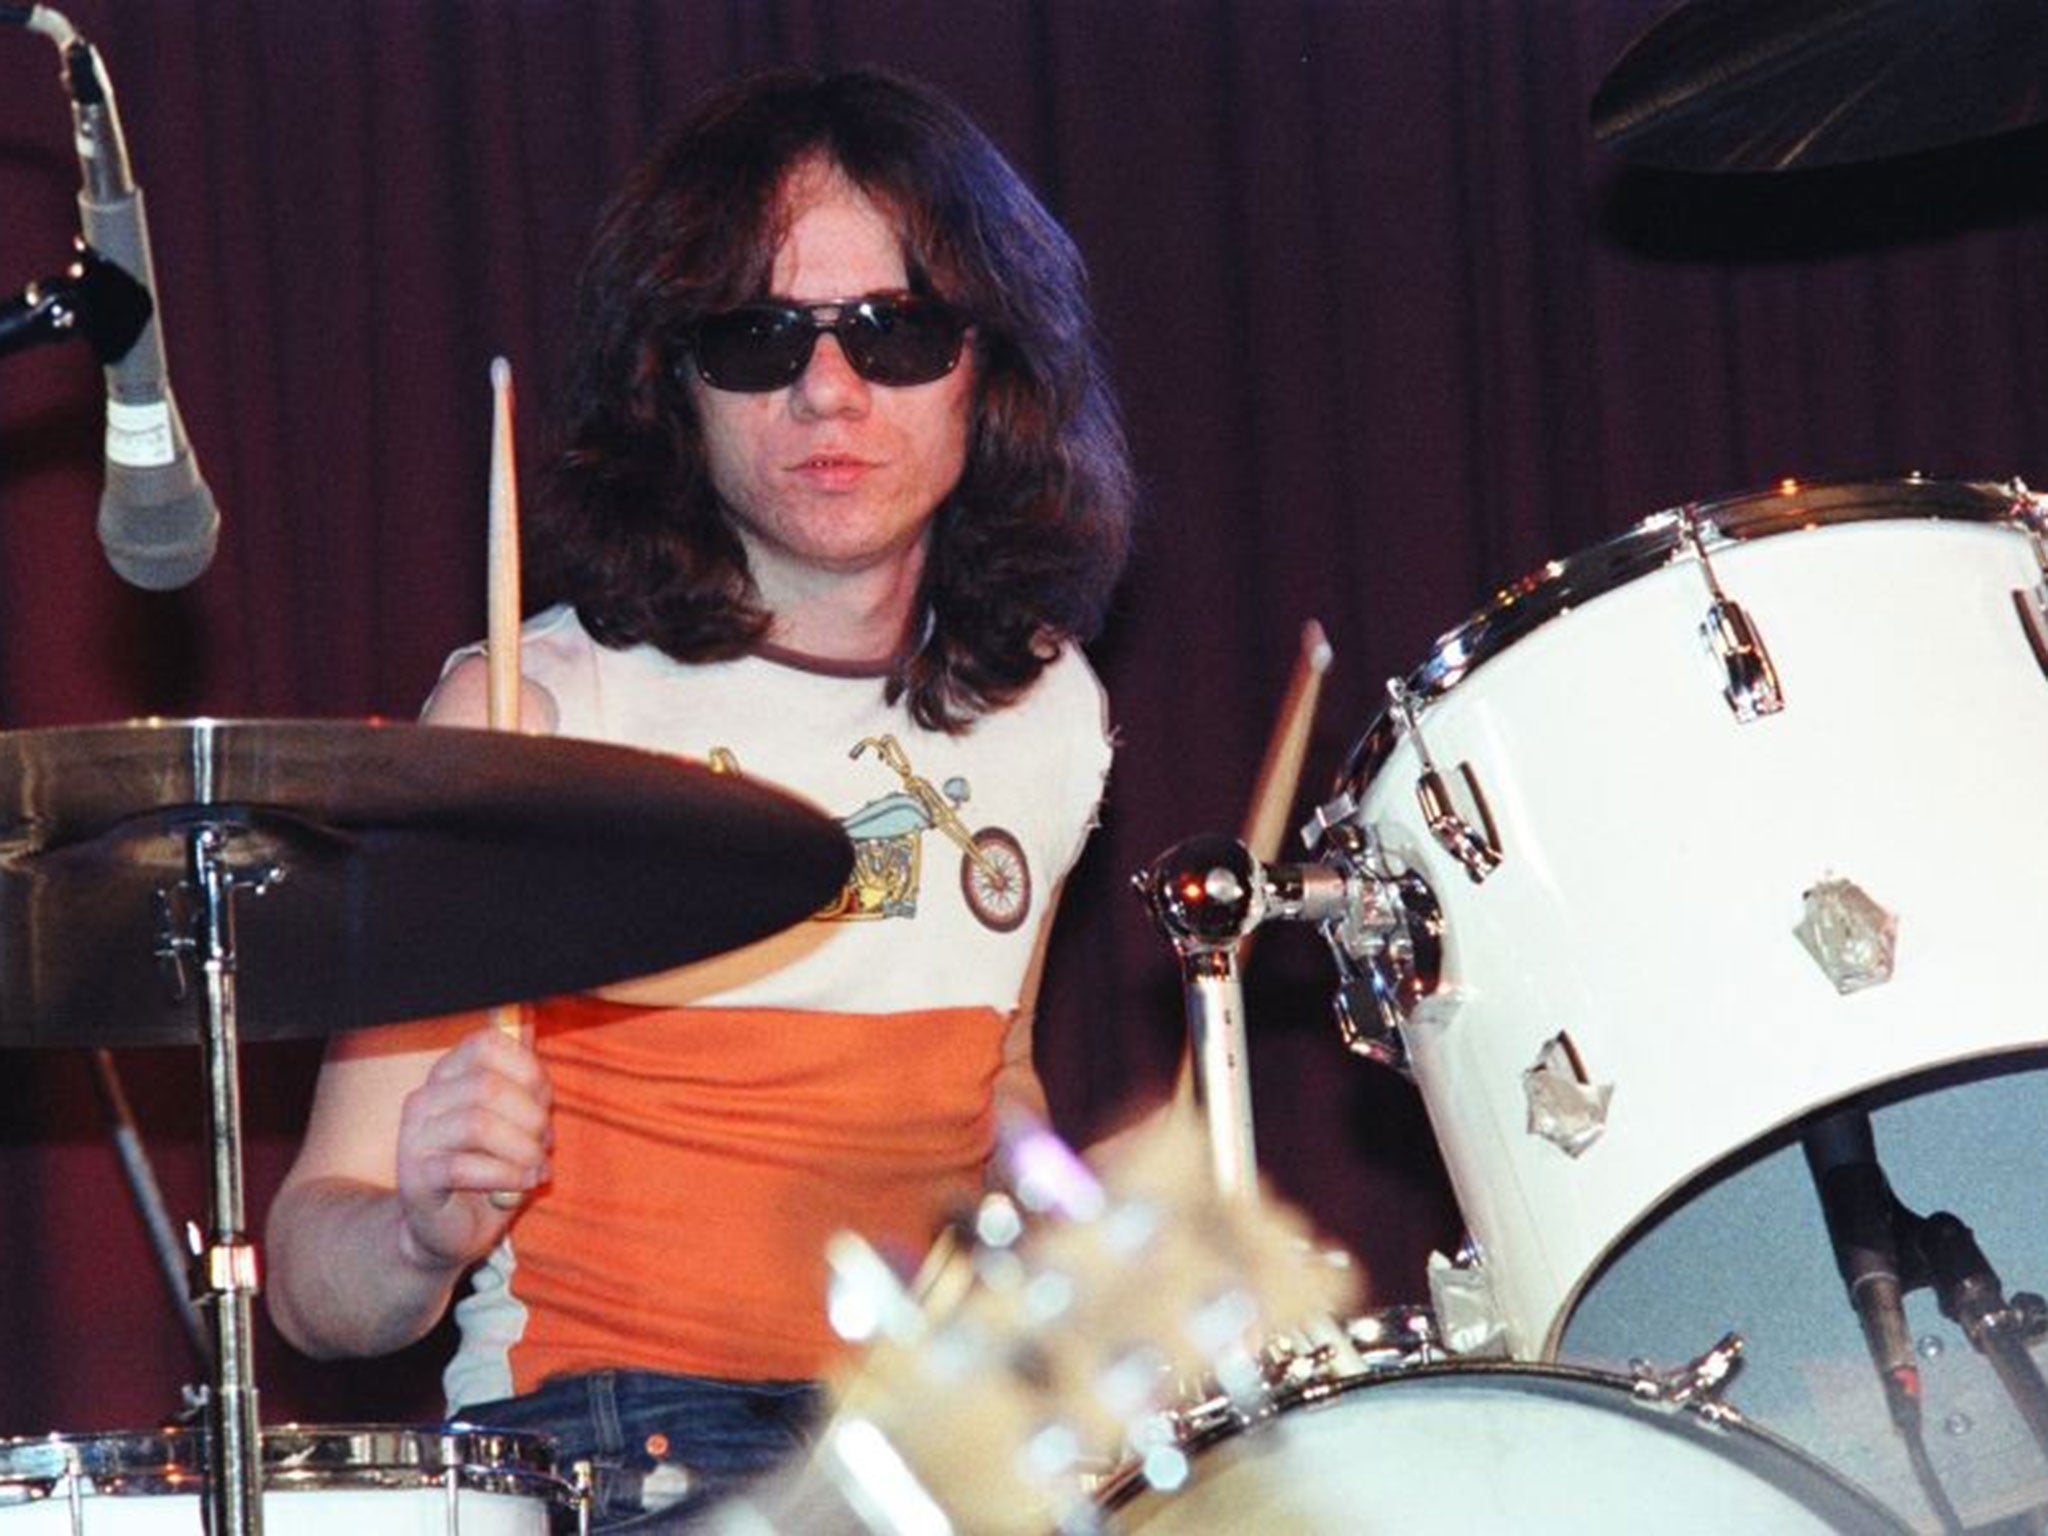 Tommy Ramone performing at The Old Waldorf Nightclub in 1978 in San Francisco, California.